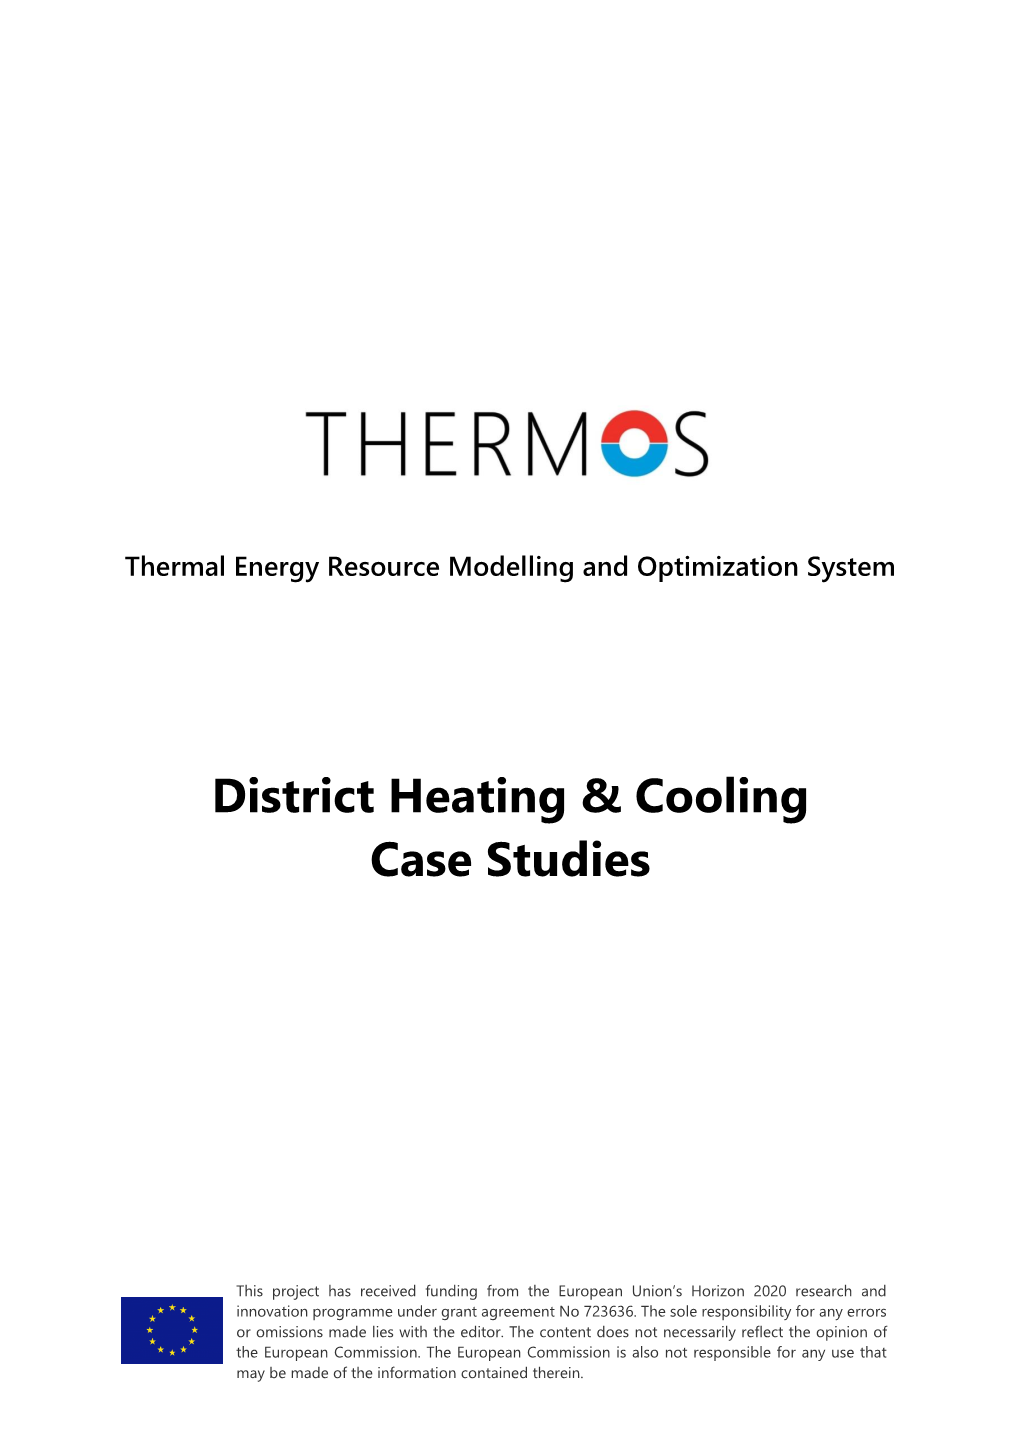 District Heating & Cooling Case Studies